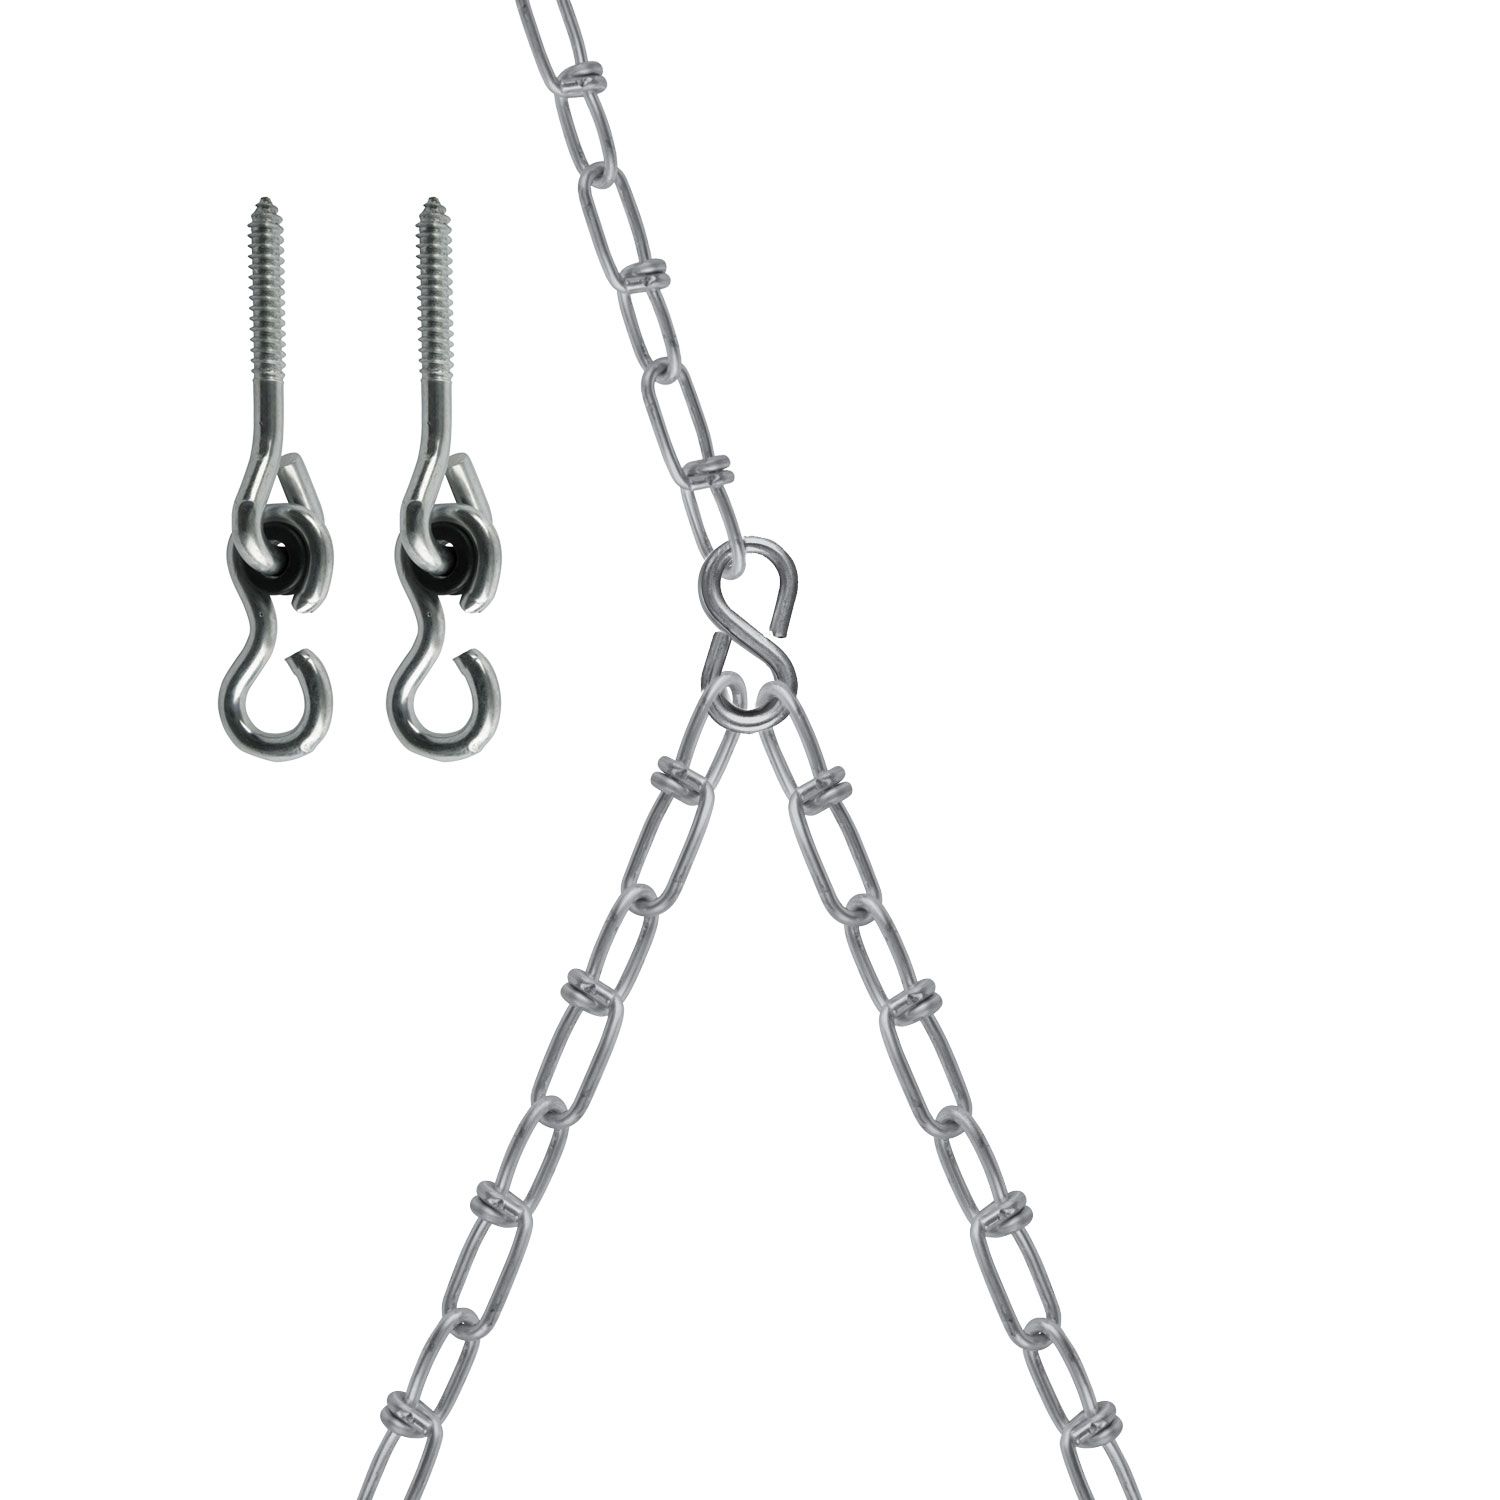 Porch Swing Kits | Assemblies | Perfection Chain Products For Porch Swings With Chain (View 17 of 25)